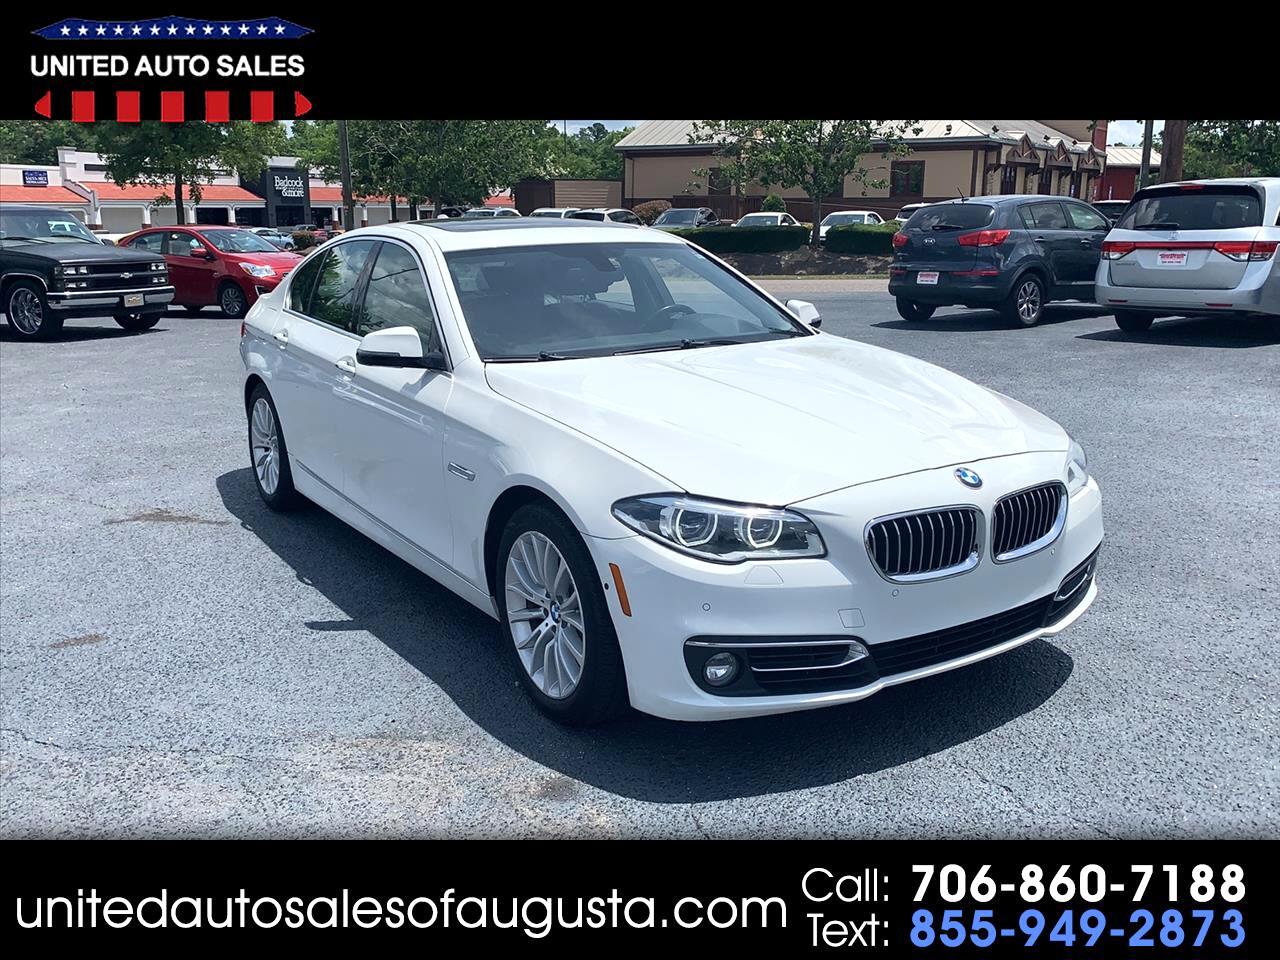 Used 16 Bmw 5 Series 528i For Sale In Augusta Ga United Auto Sales Of Augusta